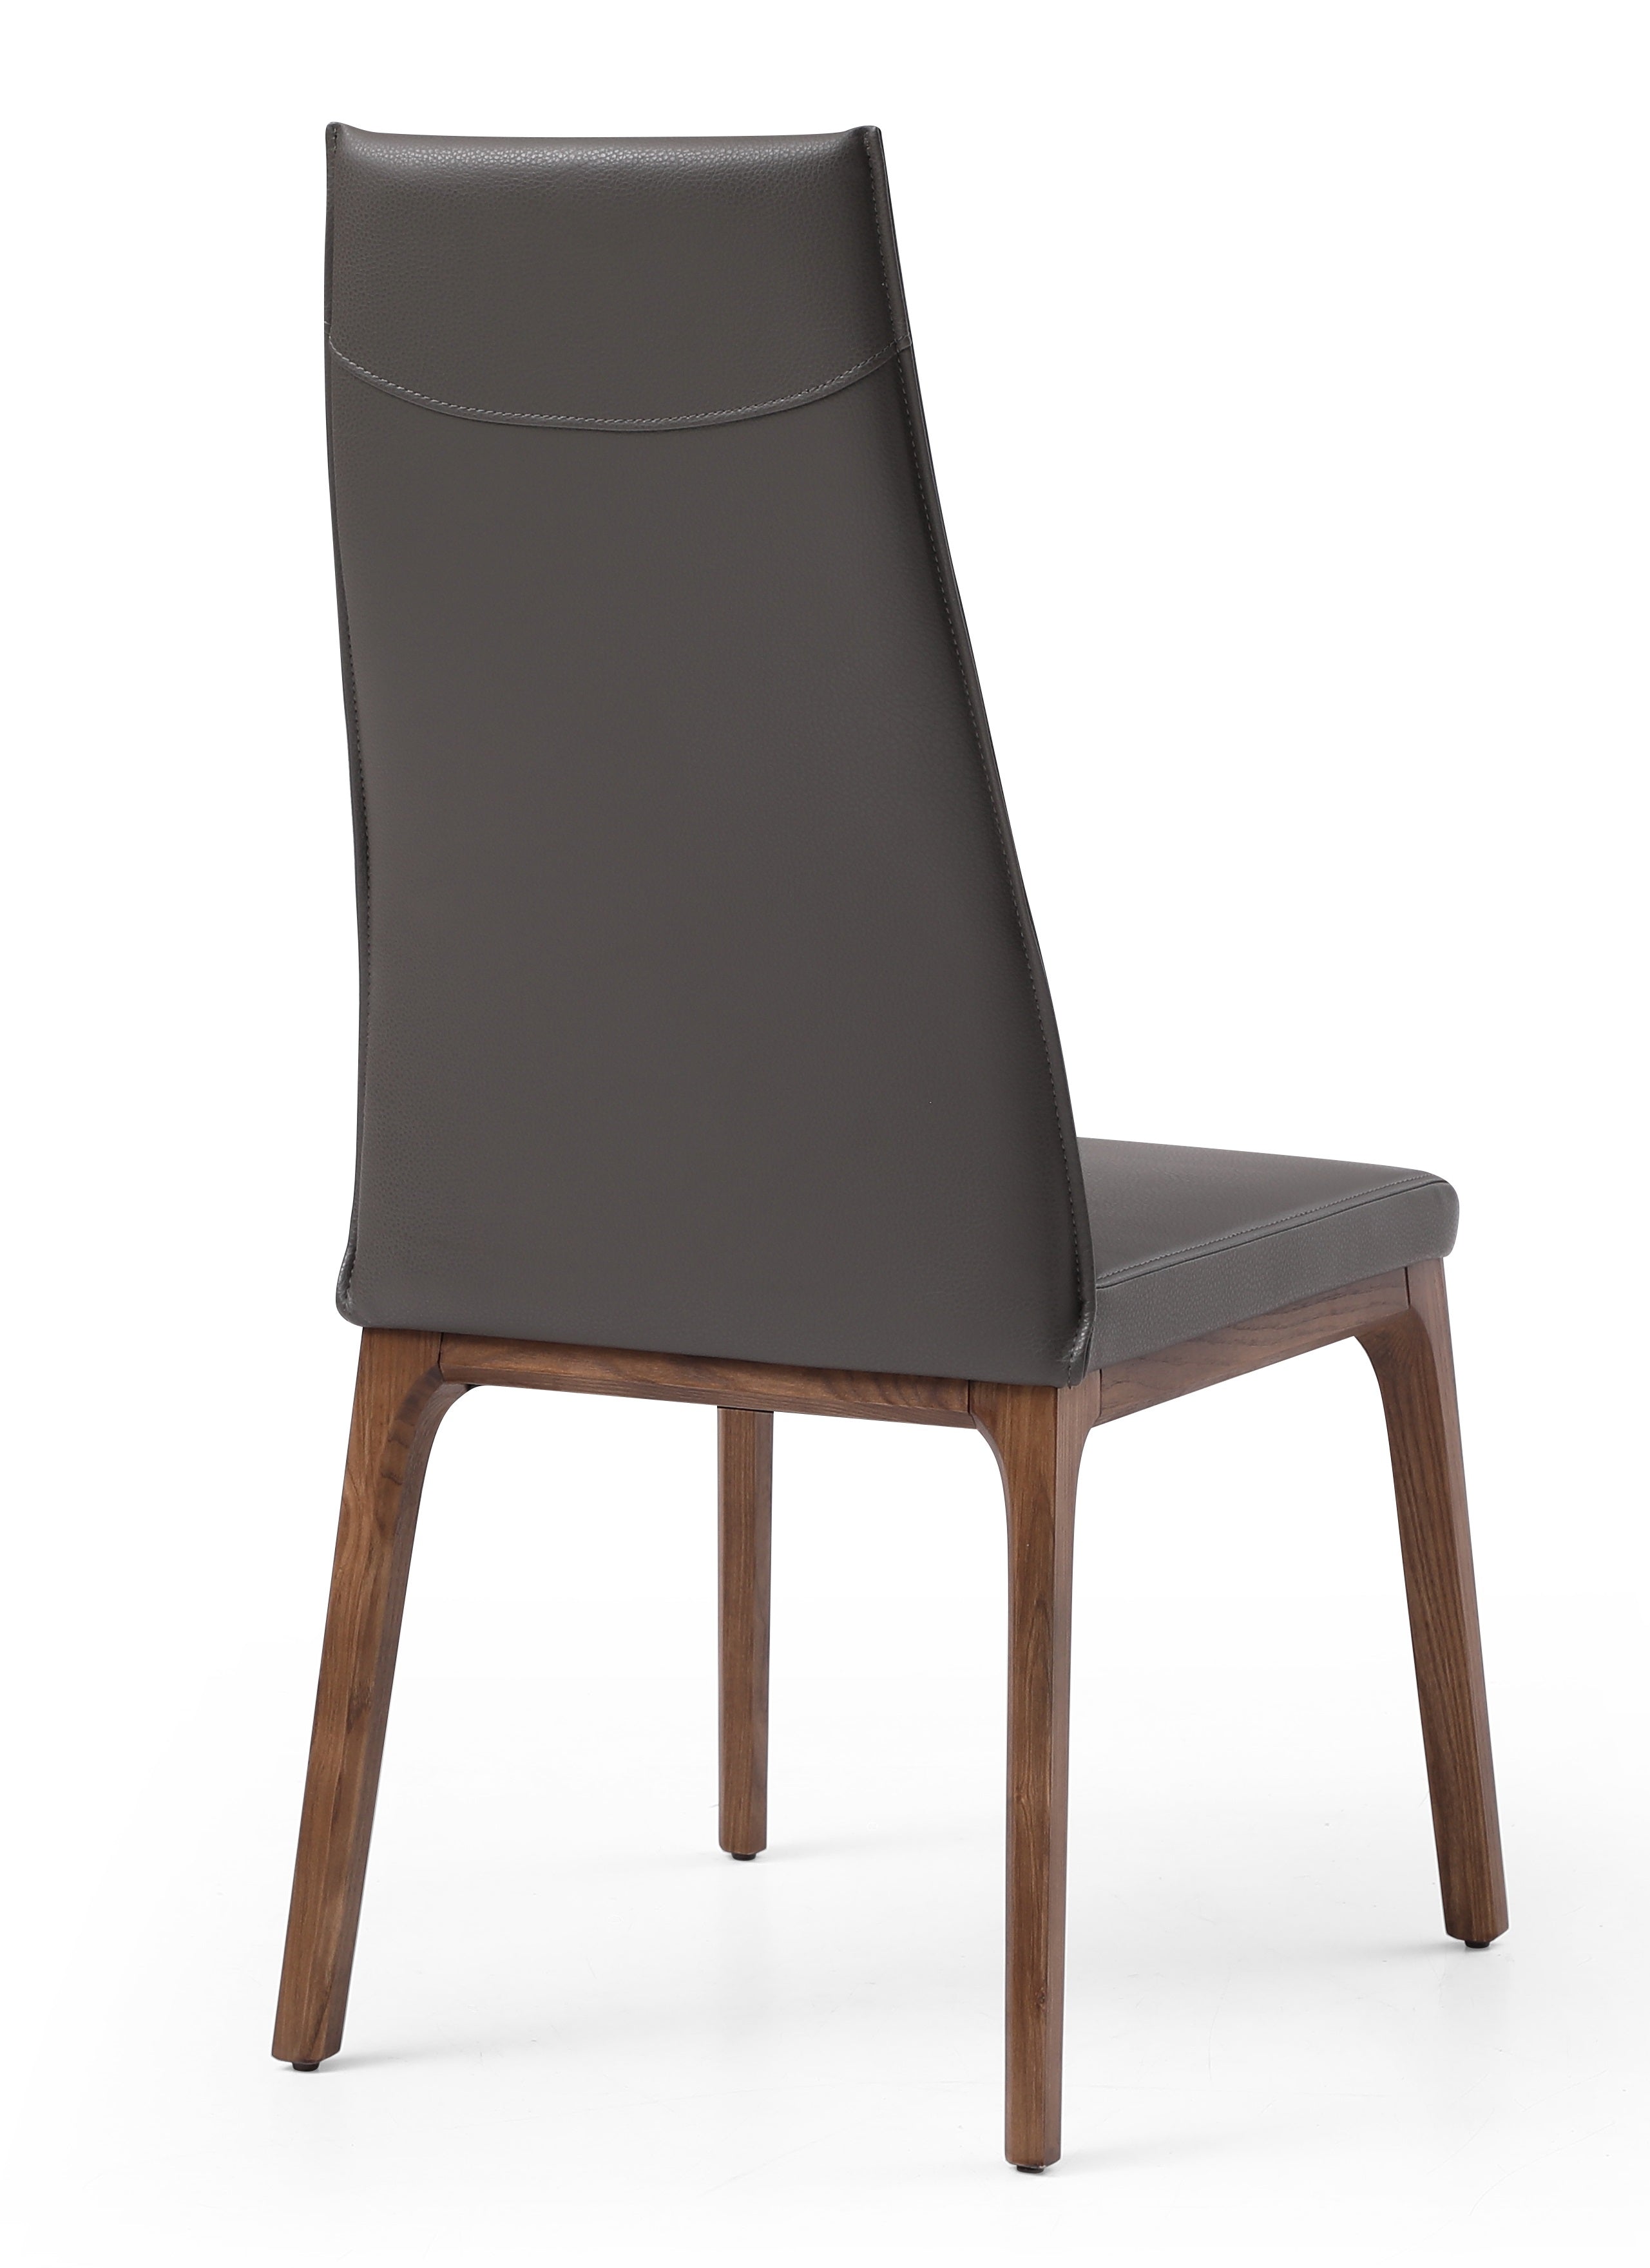 Windsor High Back Dining Chair